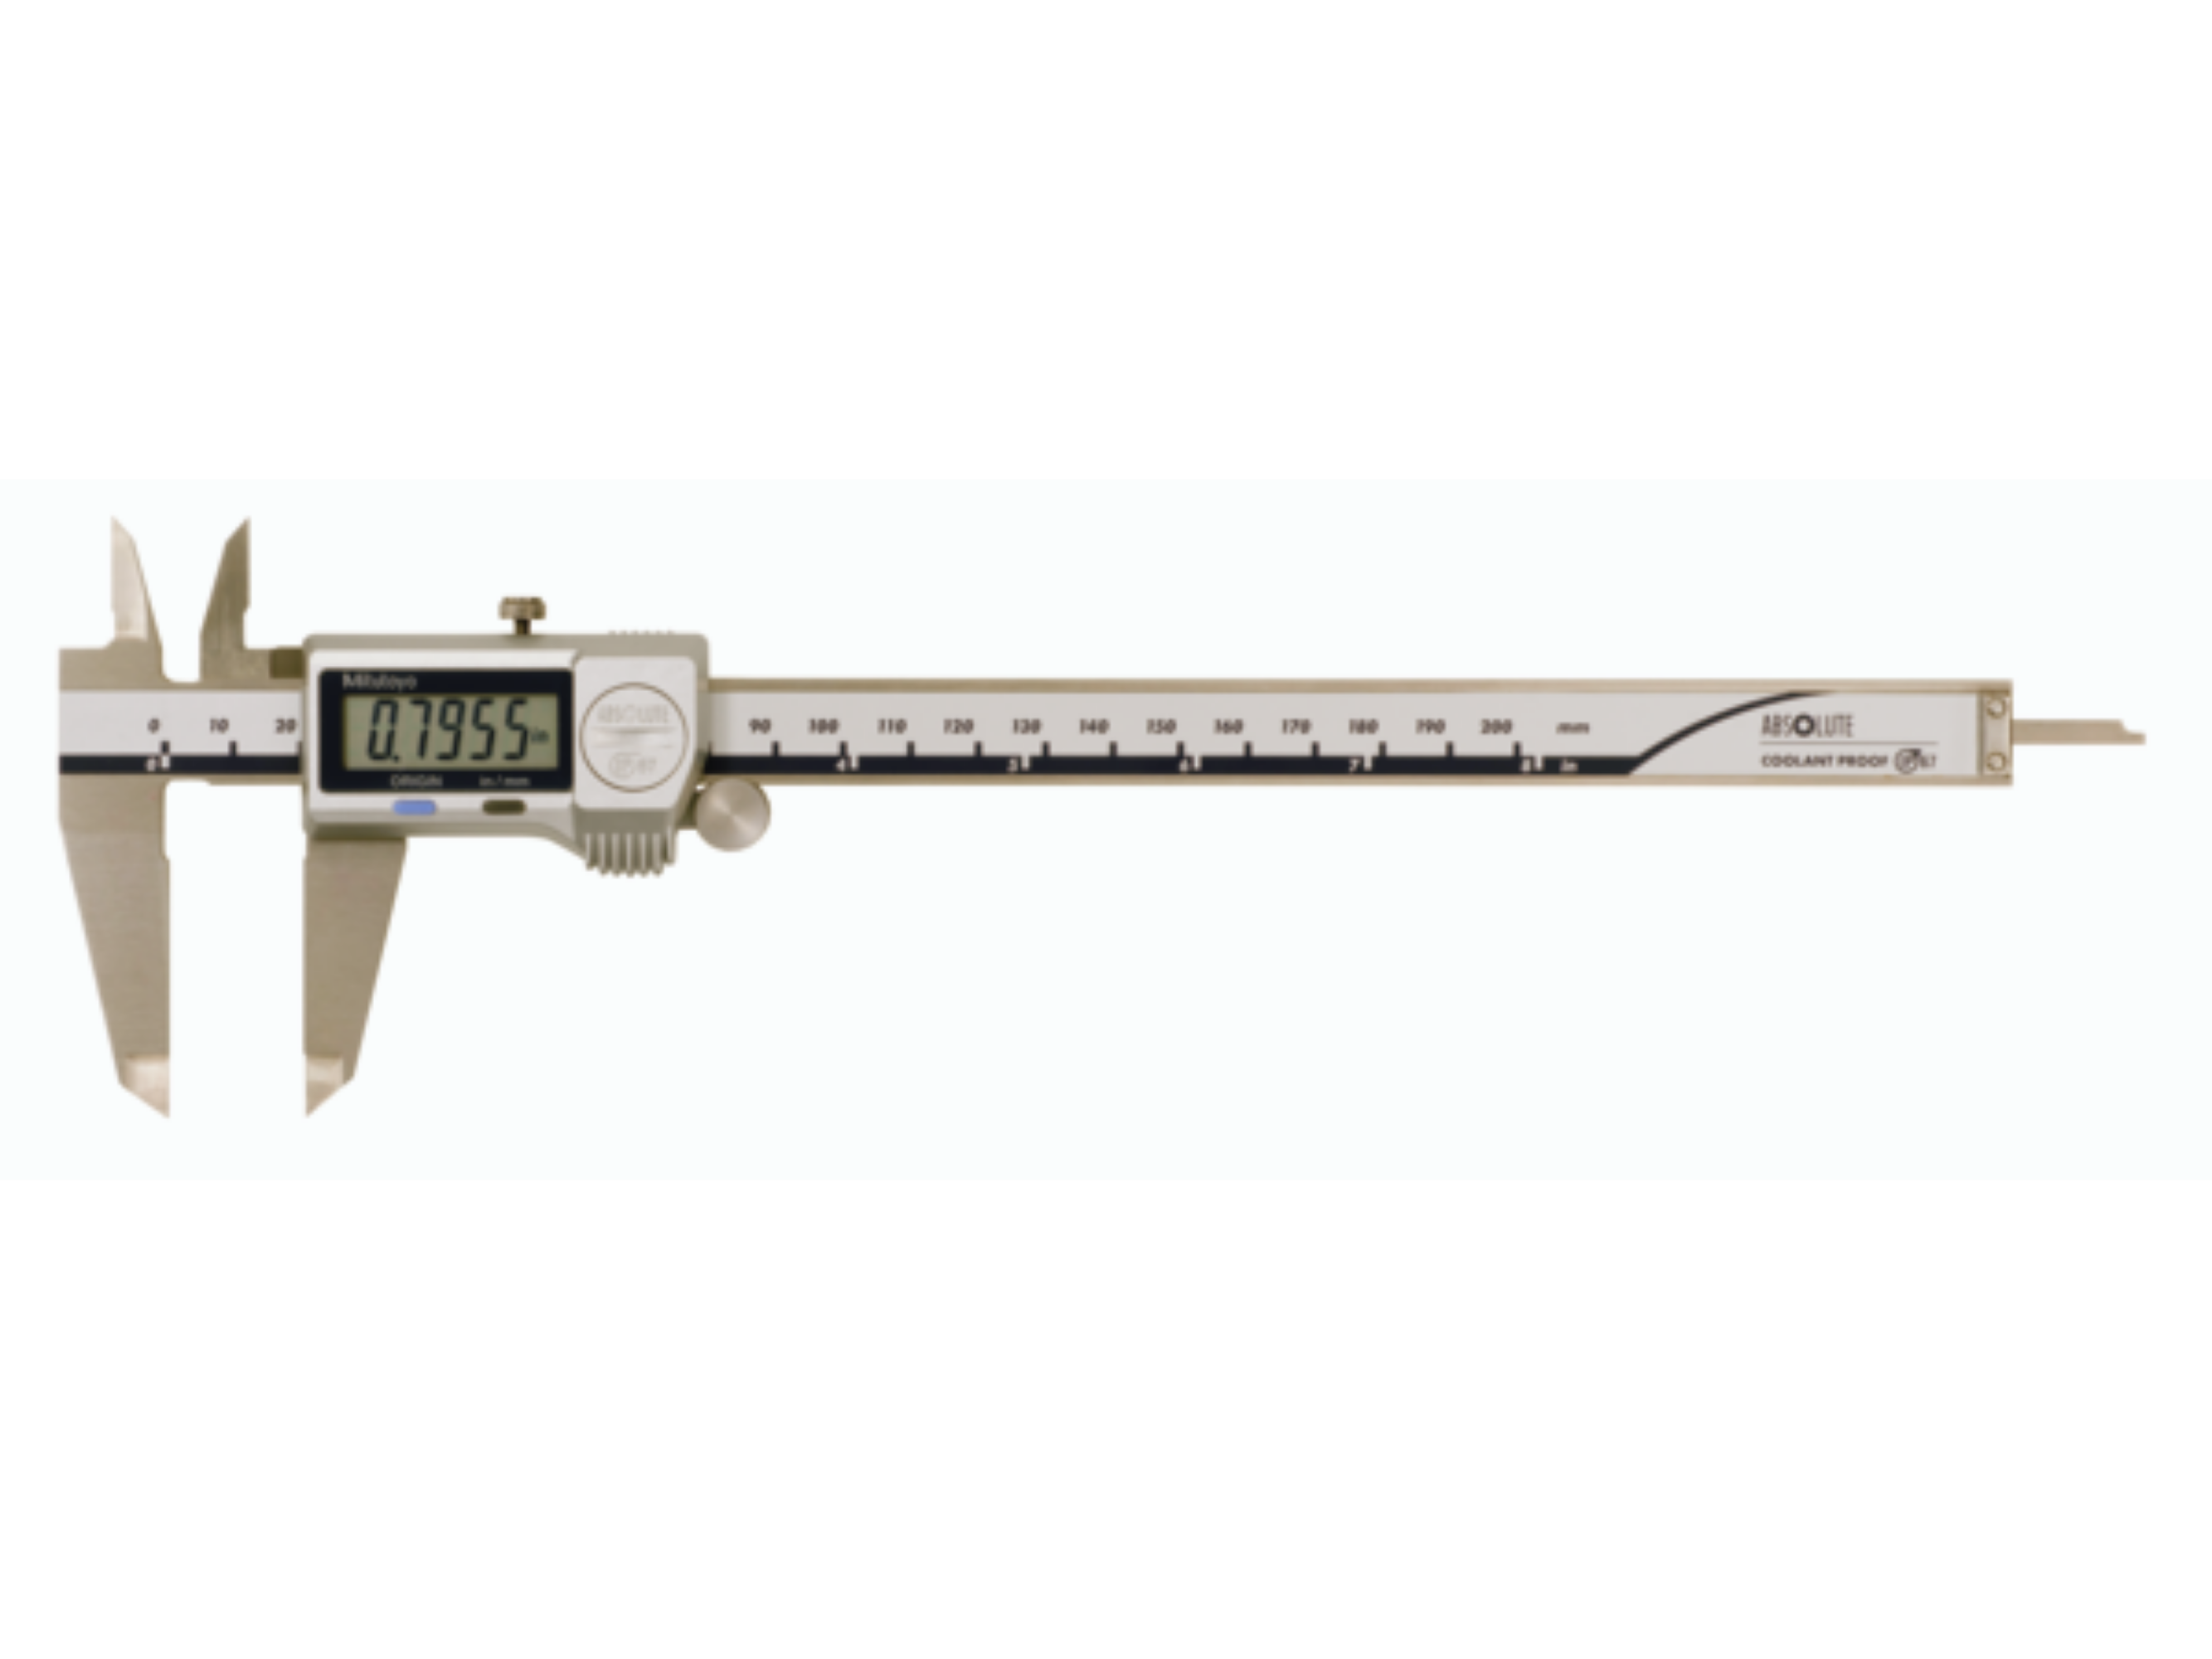 Digital ABSOLUTE Coolant Proof IP67 Caliper 0-200mm(0-8") With Output 500-763-20